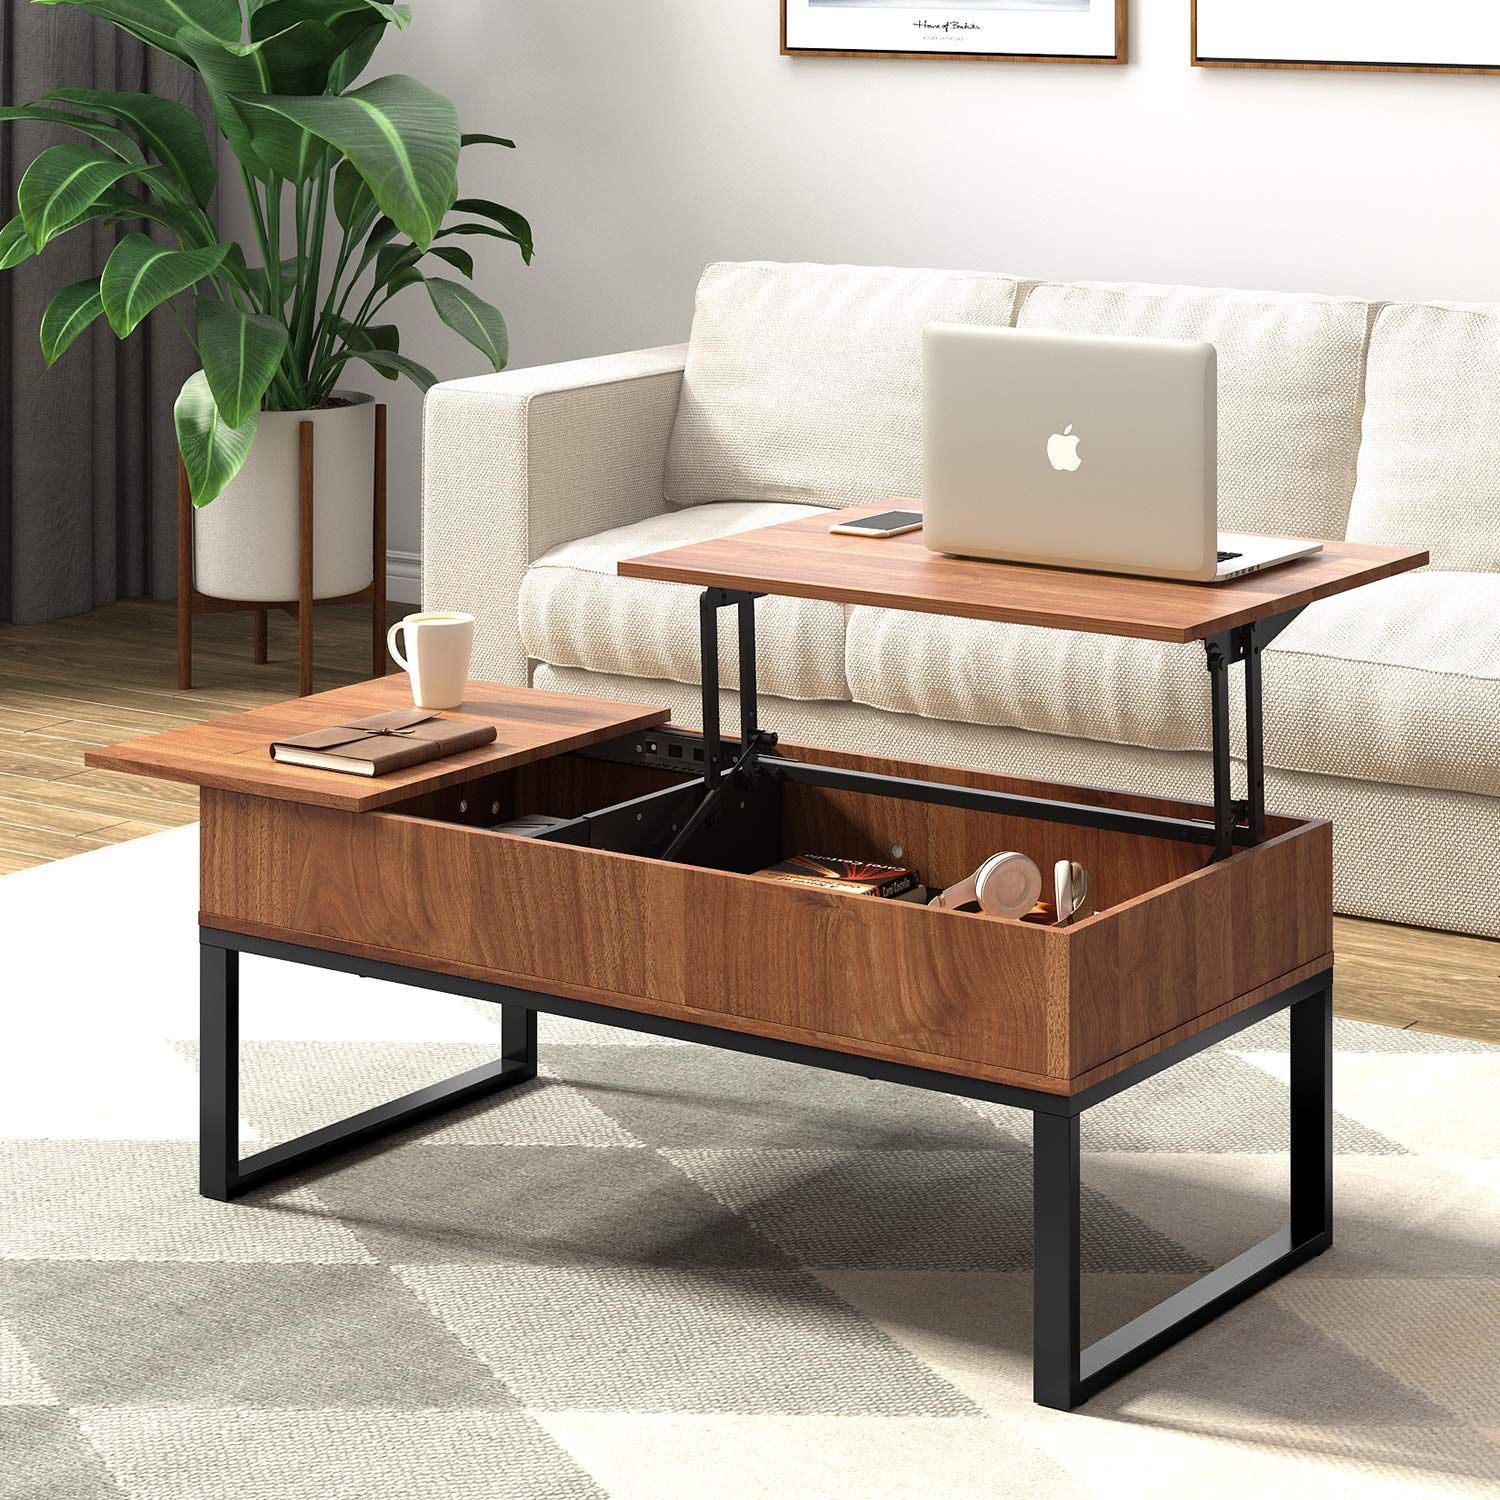 Wlive Wood Coffee Table With Adjustable Lift Top Table, Metal Frame Intended For Modern Coffee Tables With Hidden Storage Compartments (Photo 12 of 15)